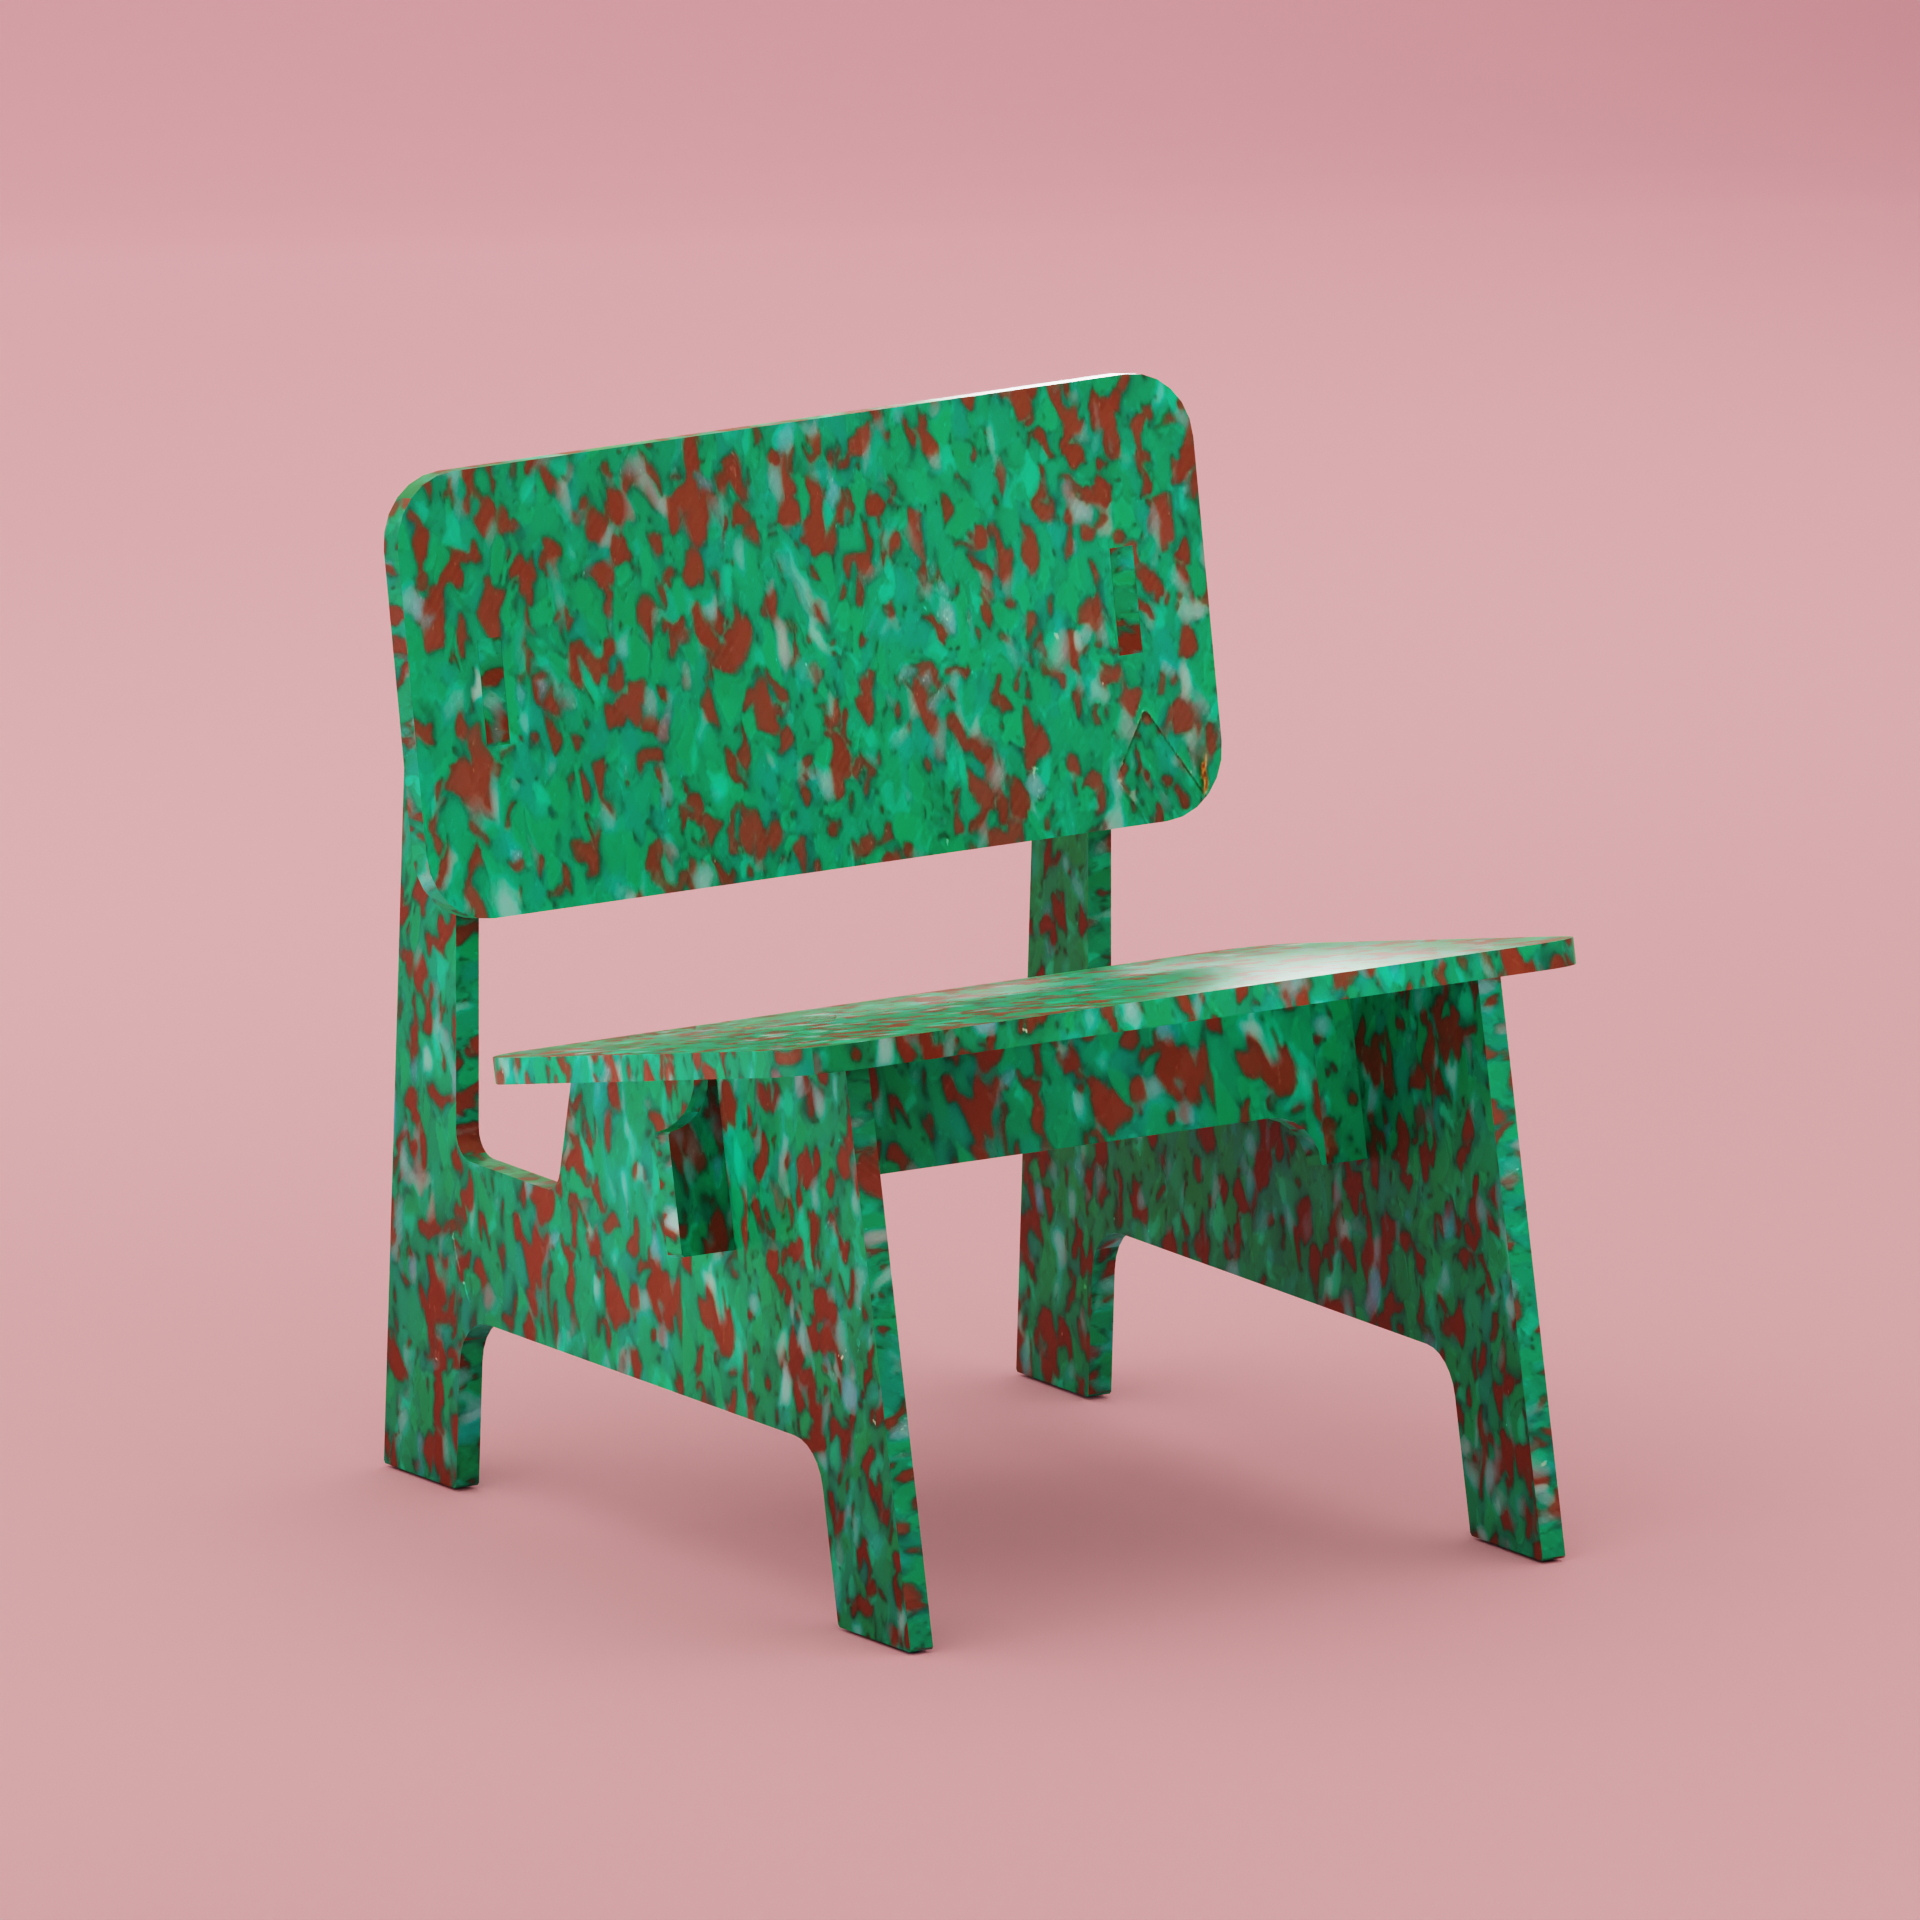 RENDER OF GREEN CHAIR BY THE MINIMONO PROJECT - BRAND FOR ECO FRIENDLY - PLAYFUL - MULTI FUNCTIONAL - SUSTAINABLE - HIGH QUALITY - DESIGN FURNITURE FROM RECYCLED PLASTIC FOR BOTH ADULT AND CHILDREN MADE IN BERLIN GERMANY